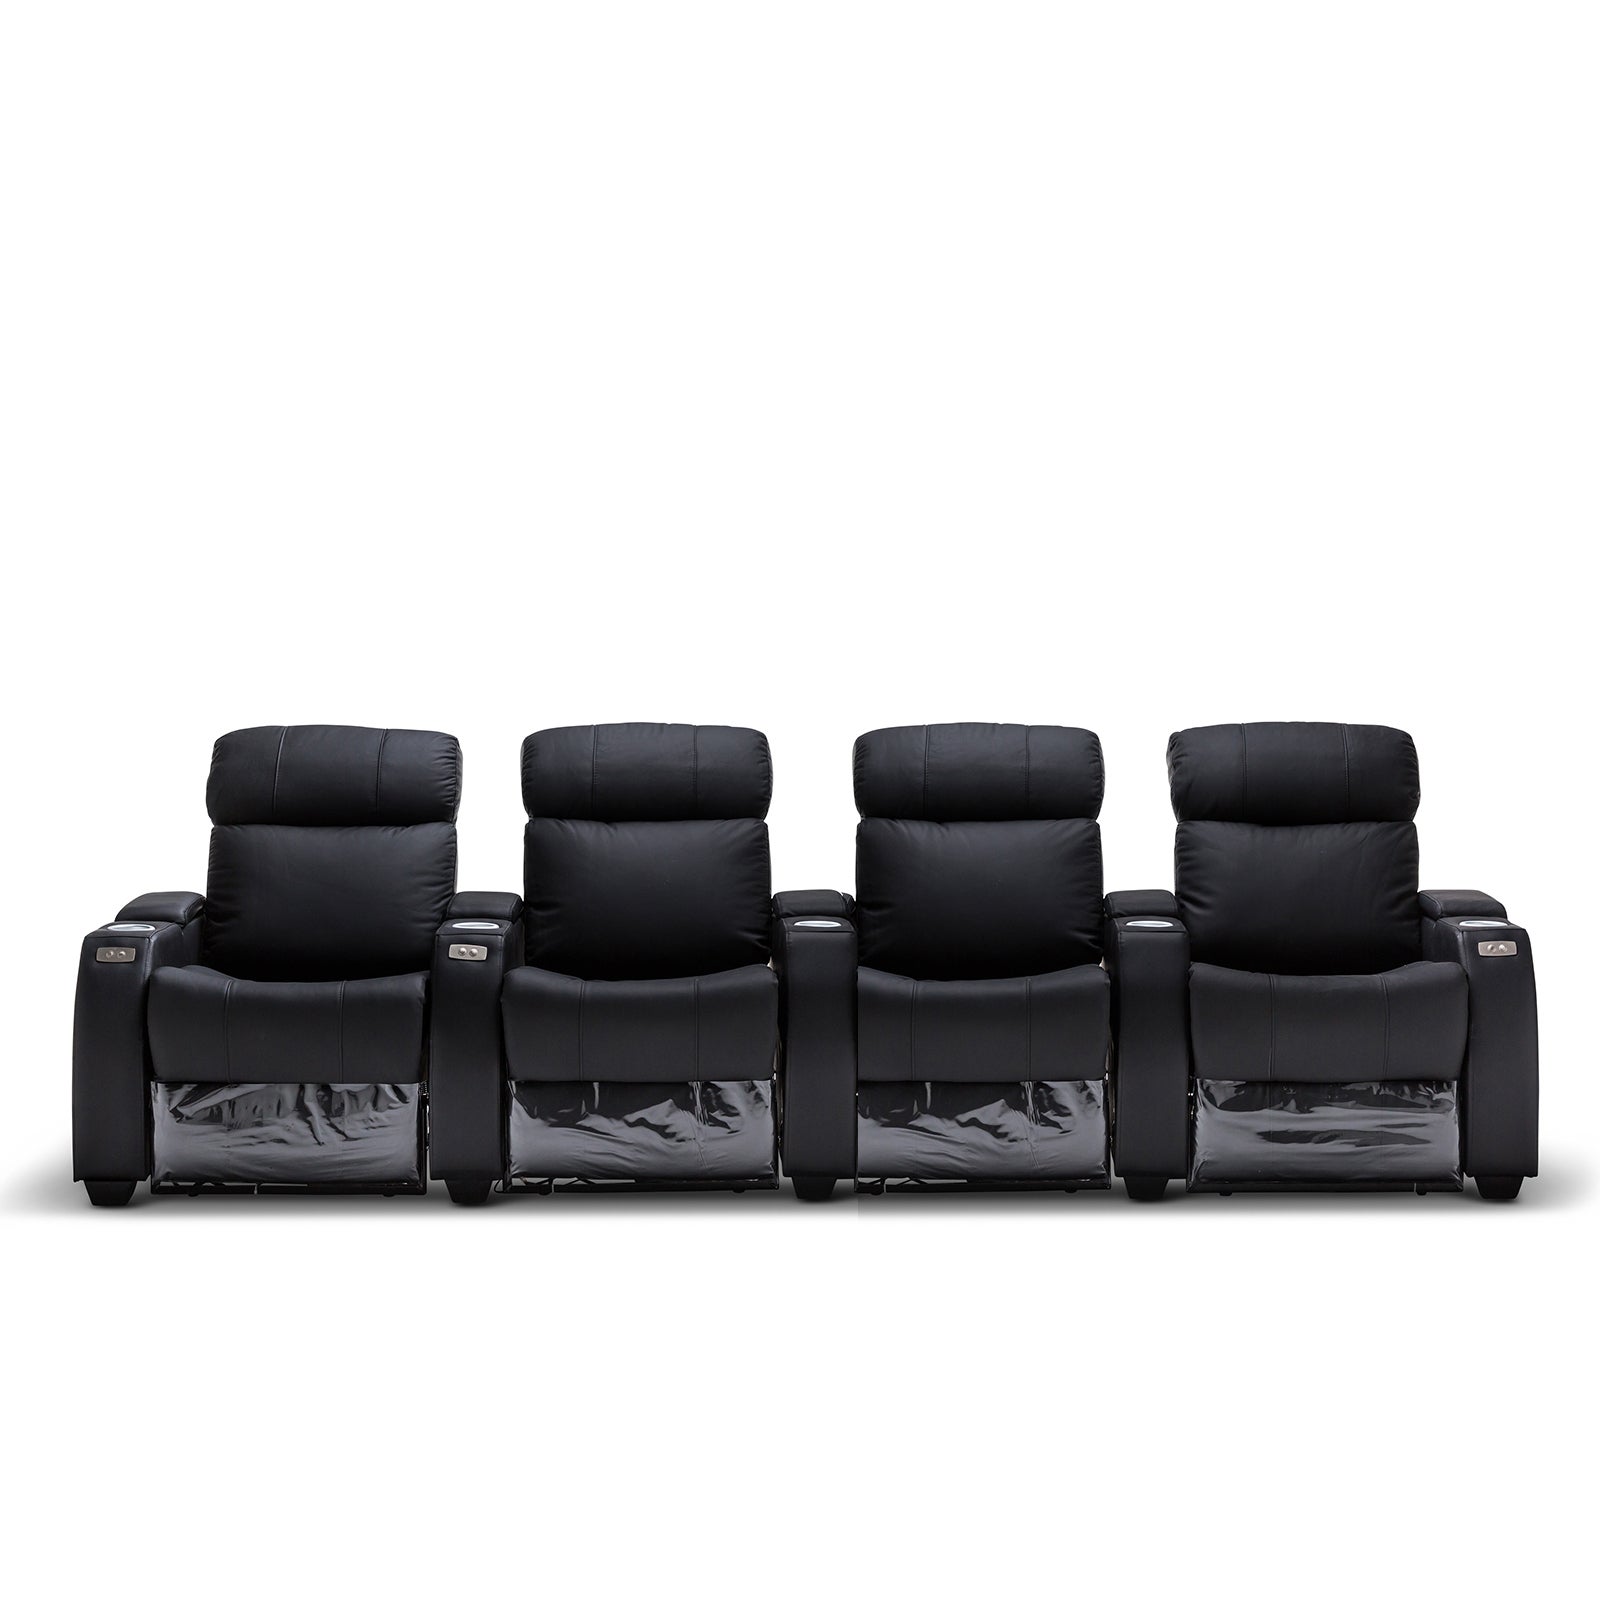 Anna Black Leather Electric Recliner Home Theatre Lounge Suite - 4 Seater